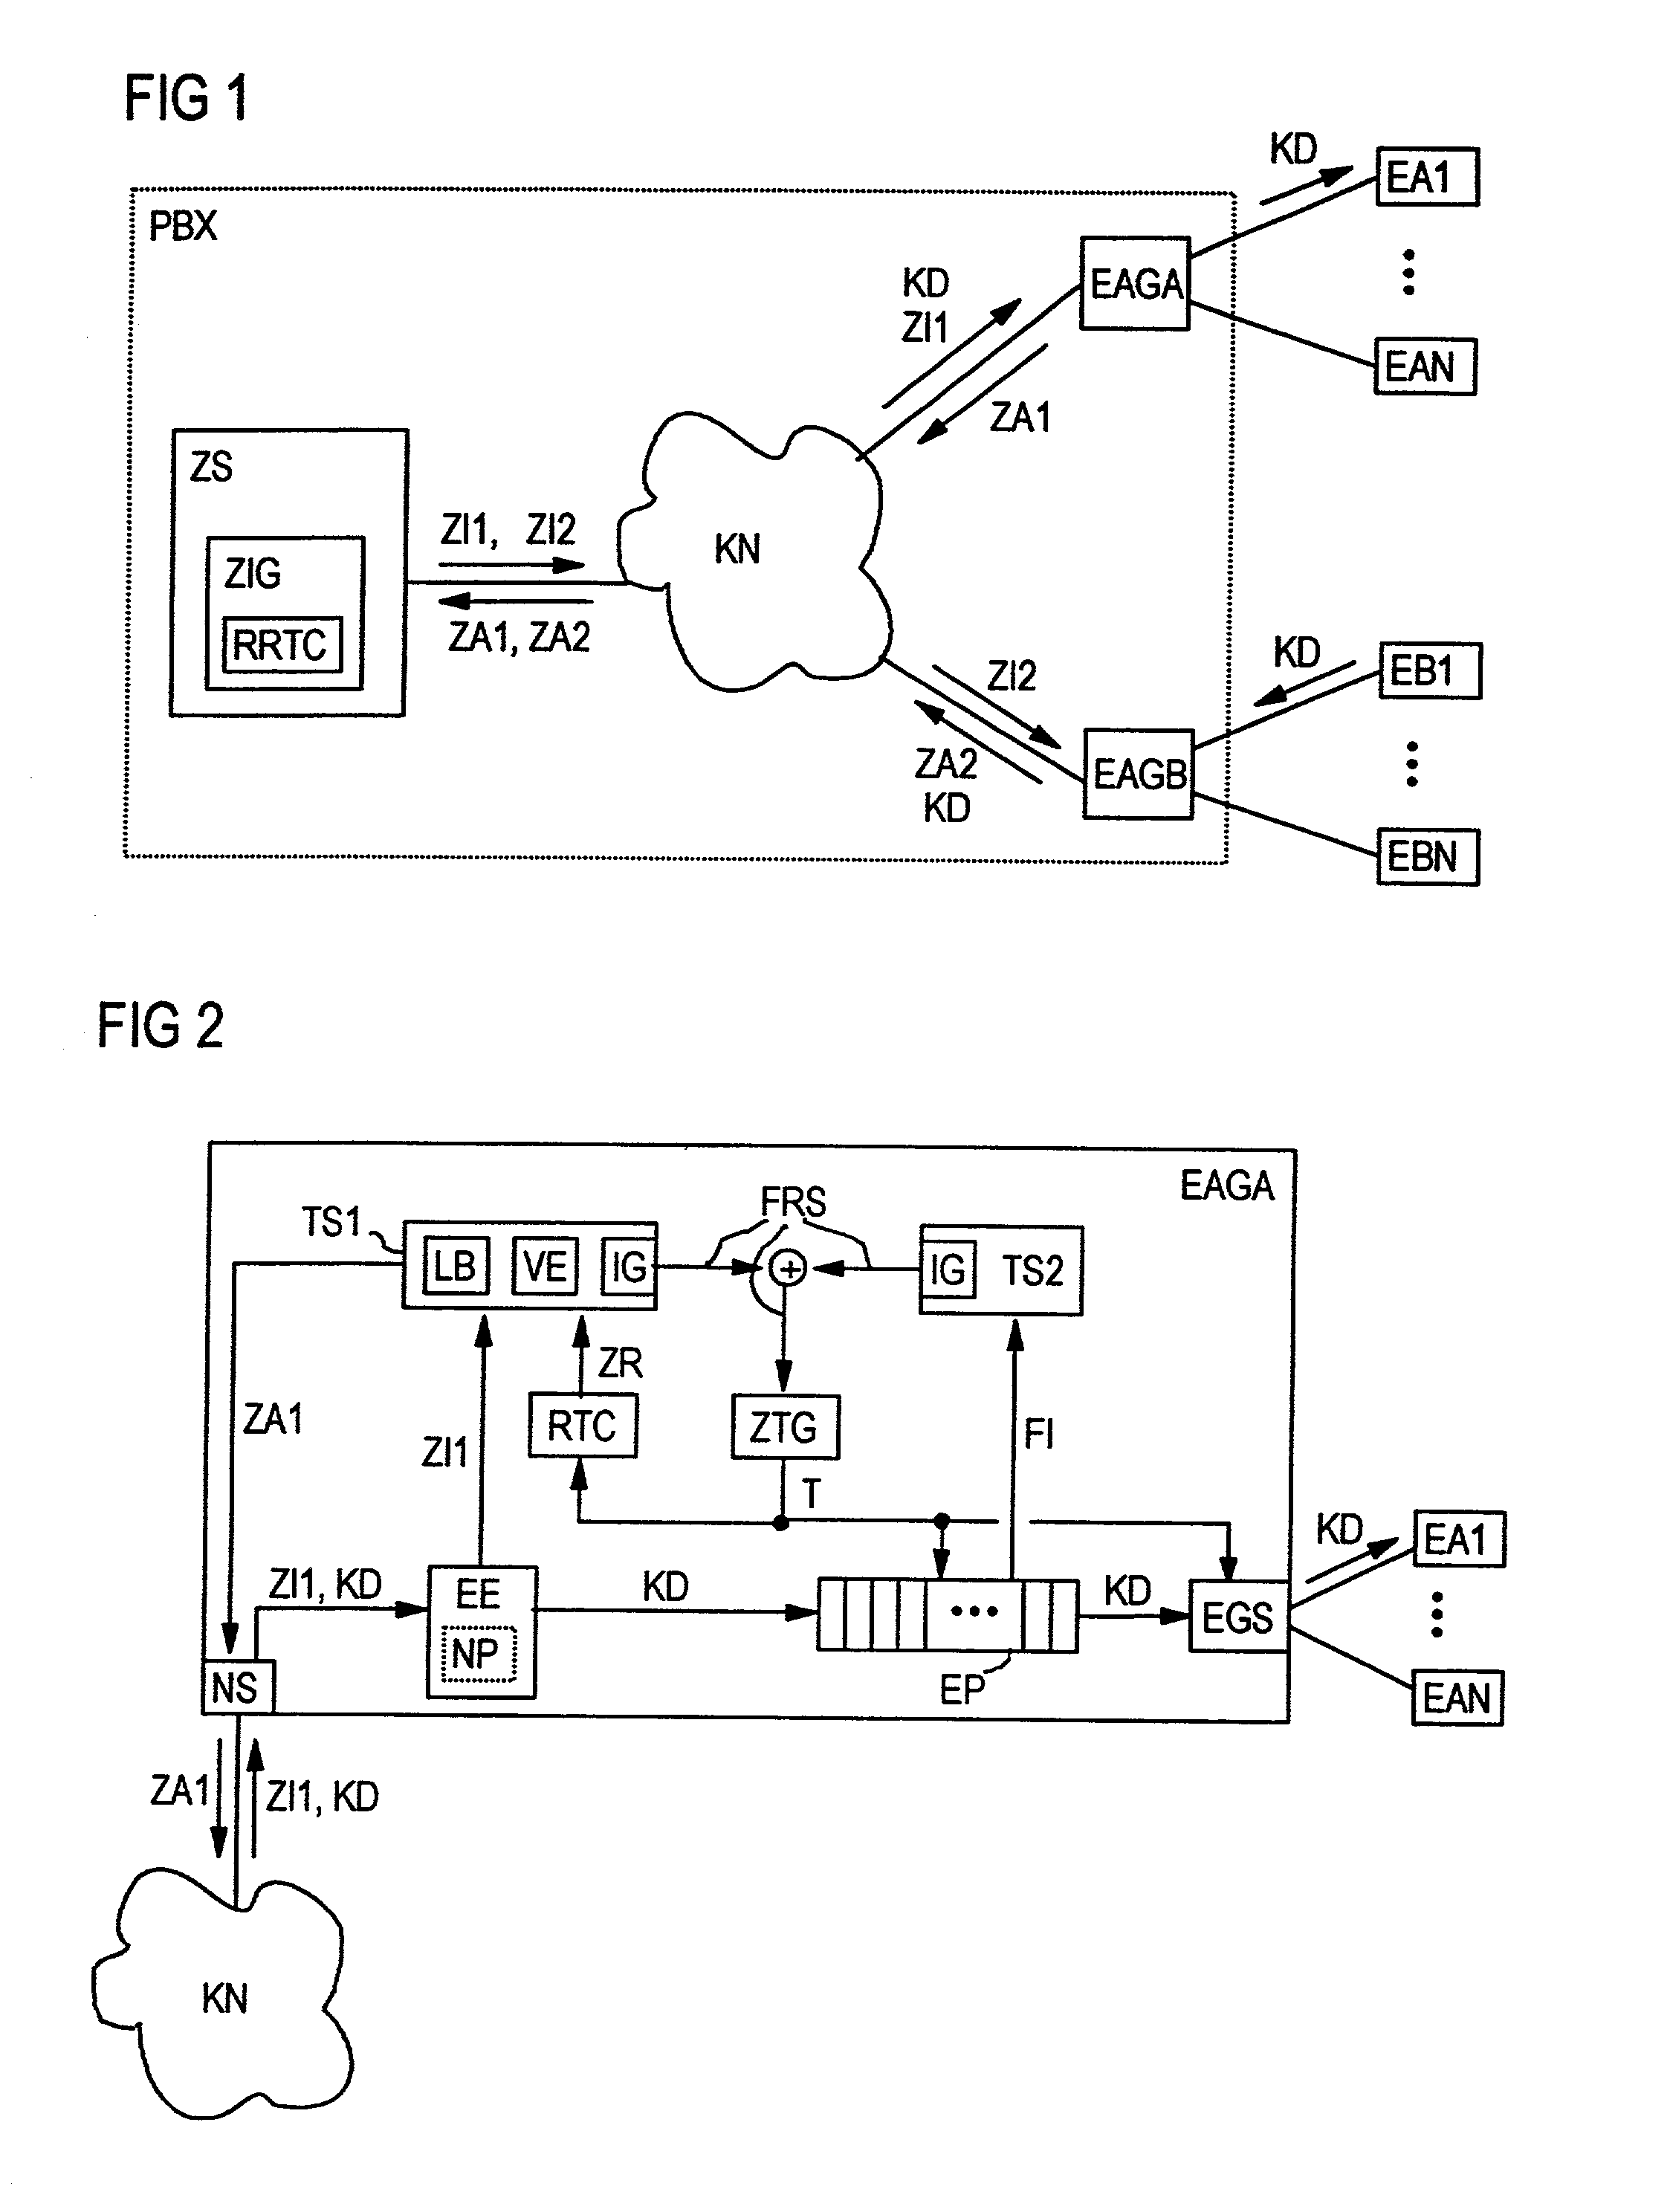 System for synchronizing communications system components coupled via a communications network